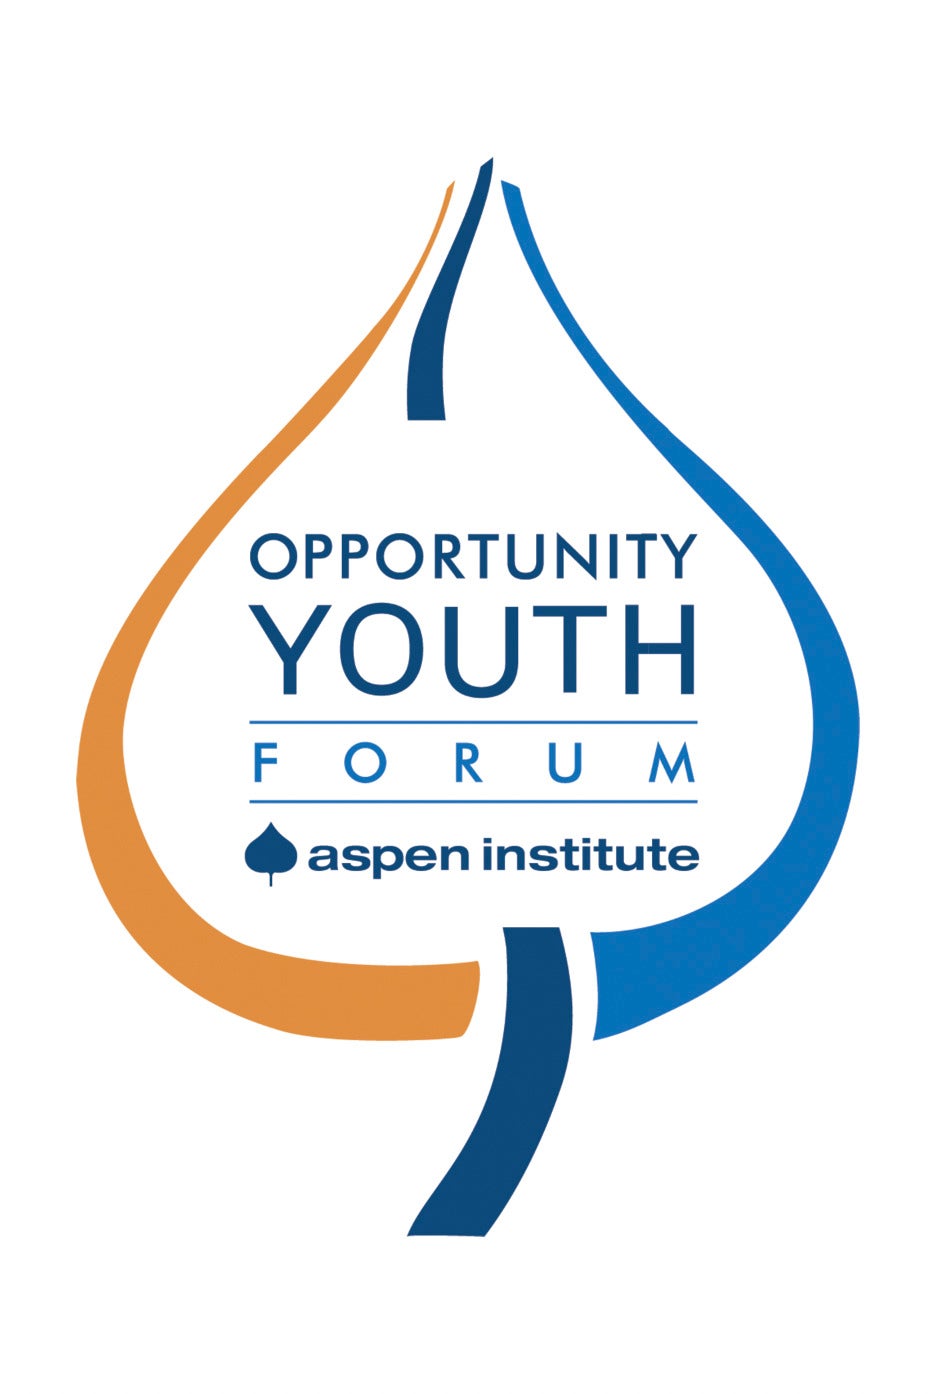 The Opportunity Youth Forum